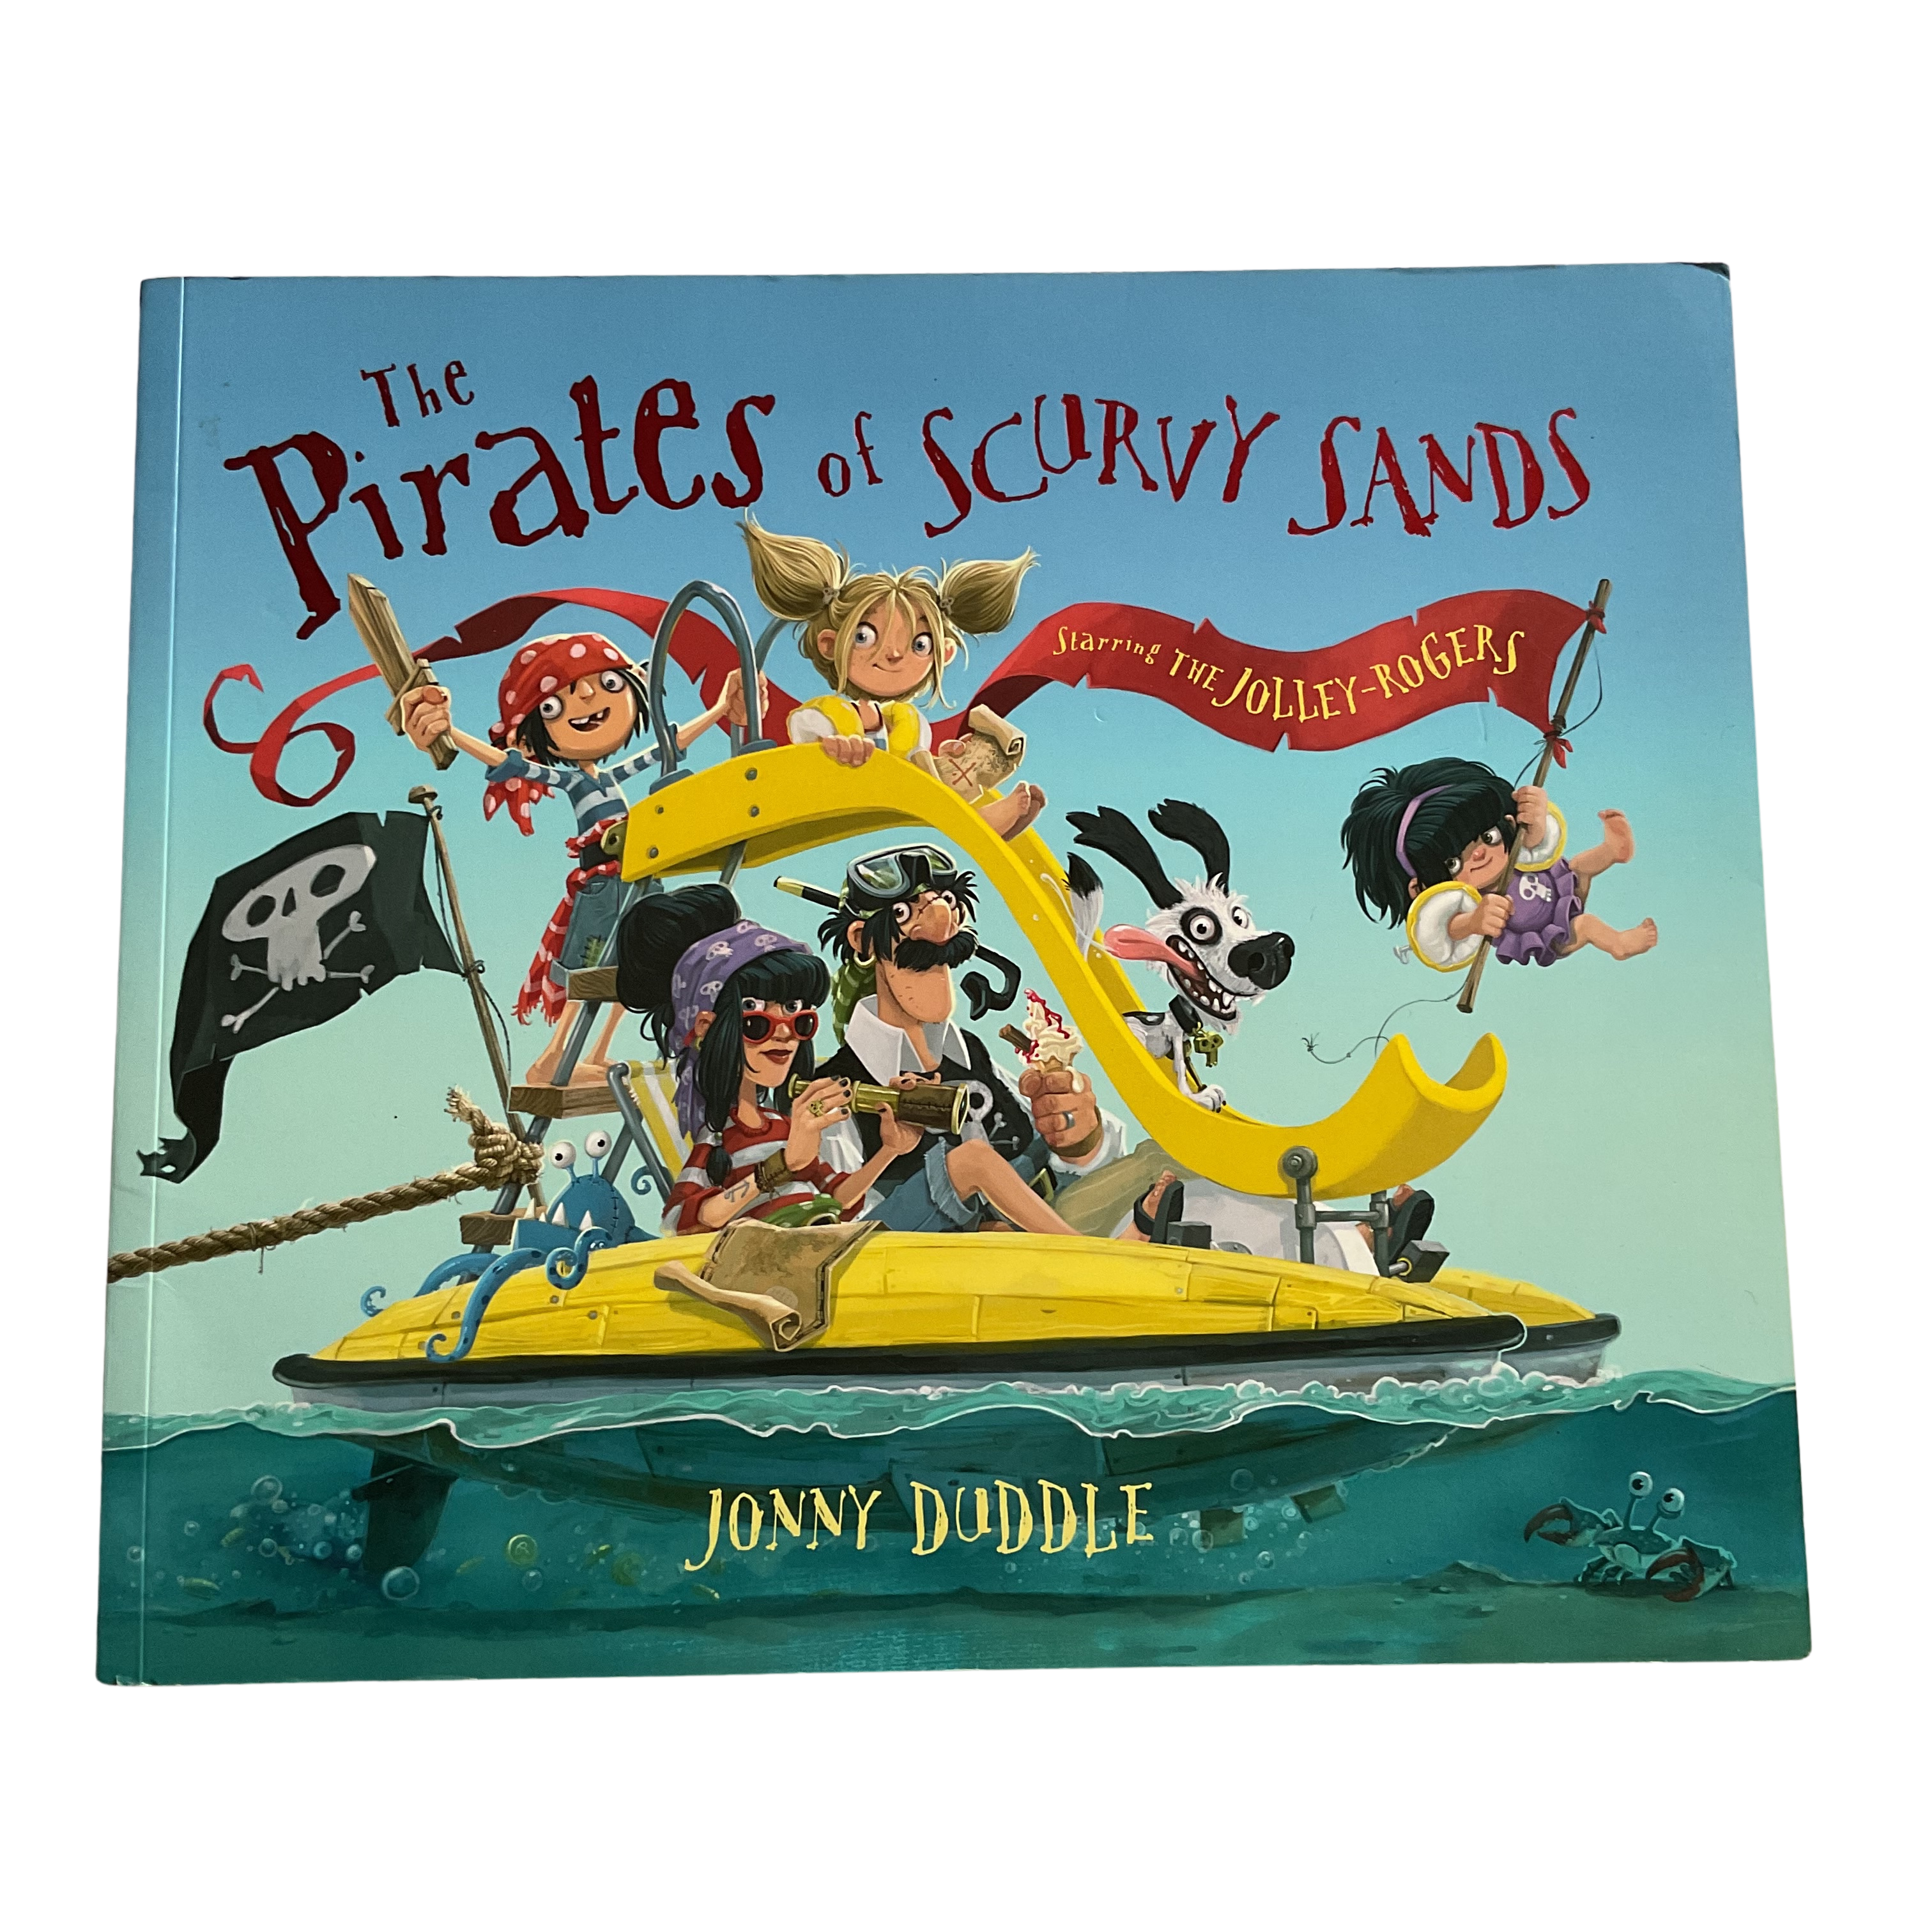 The Pirates of Scurvy Sands - Paperback